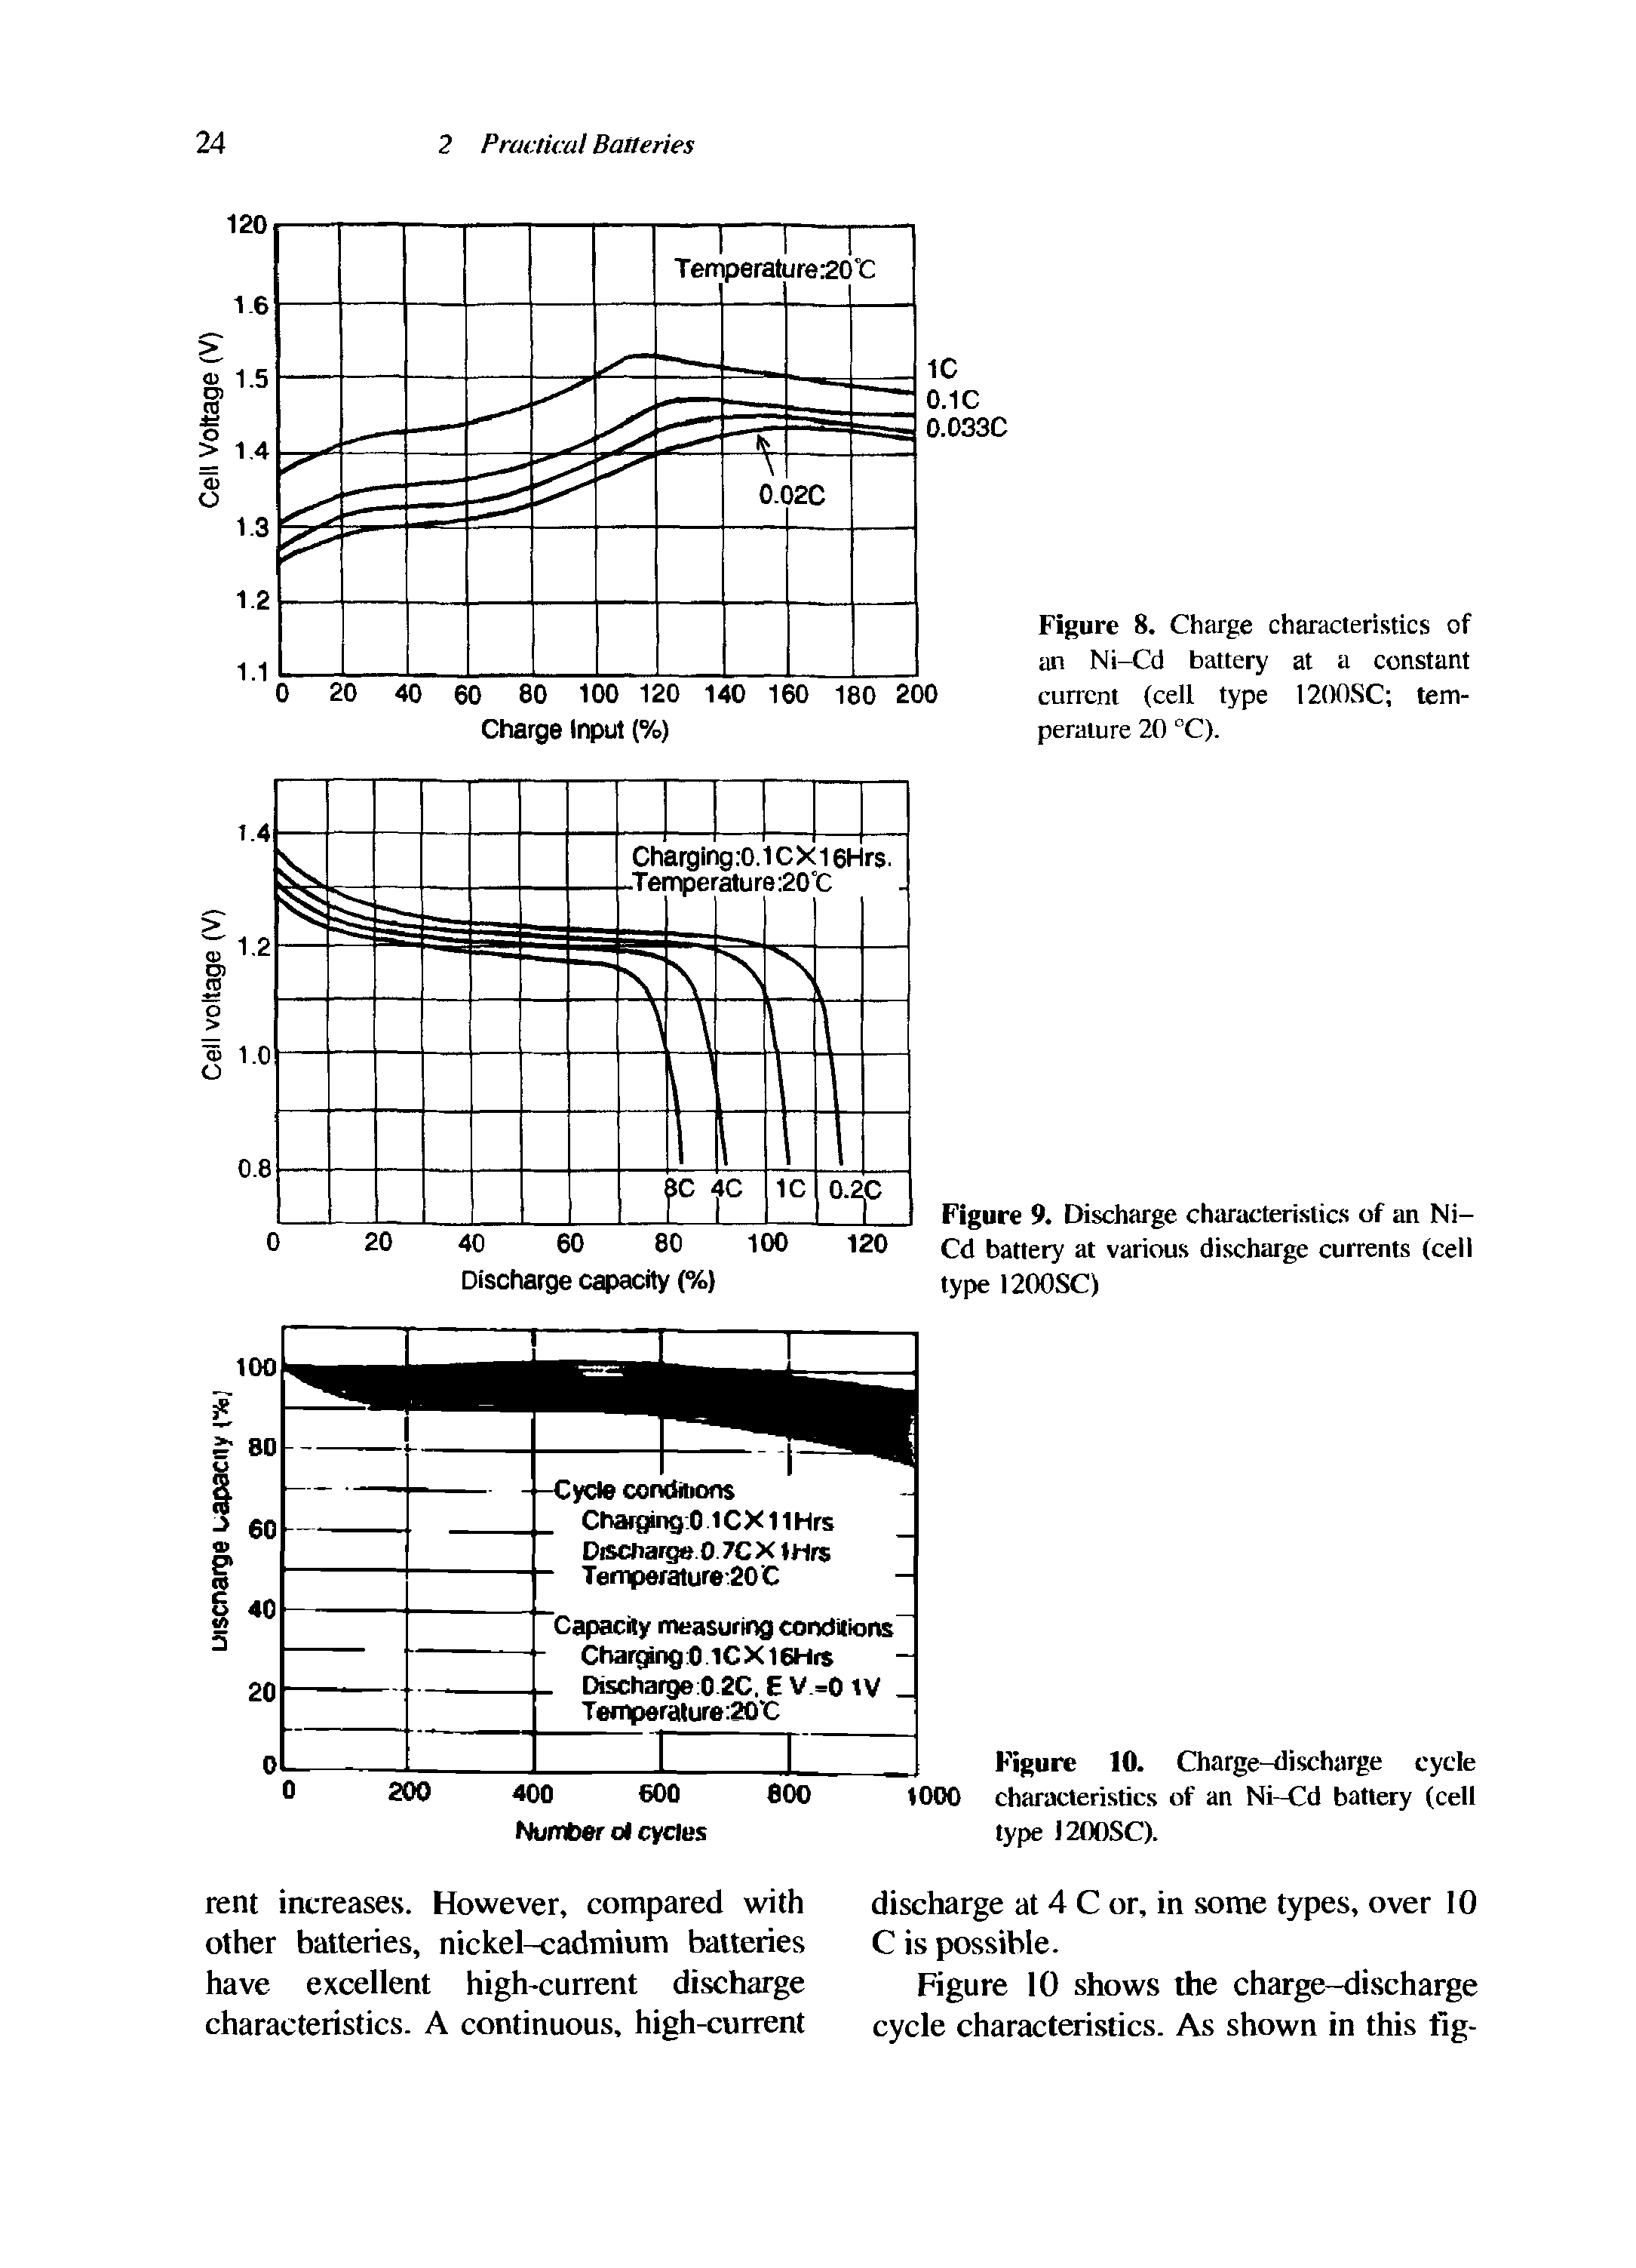 Figure 10. Charge-discharge cycle characteristics of an Ni-Cd battery (cell type 1200SC).